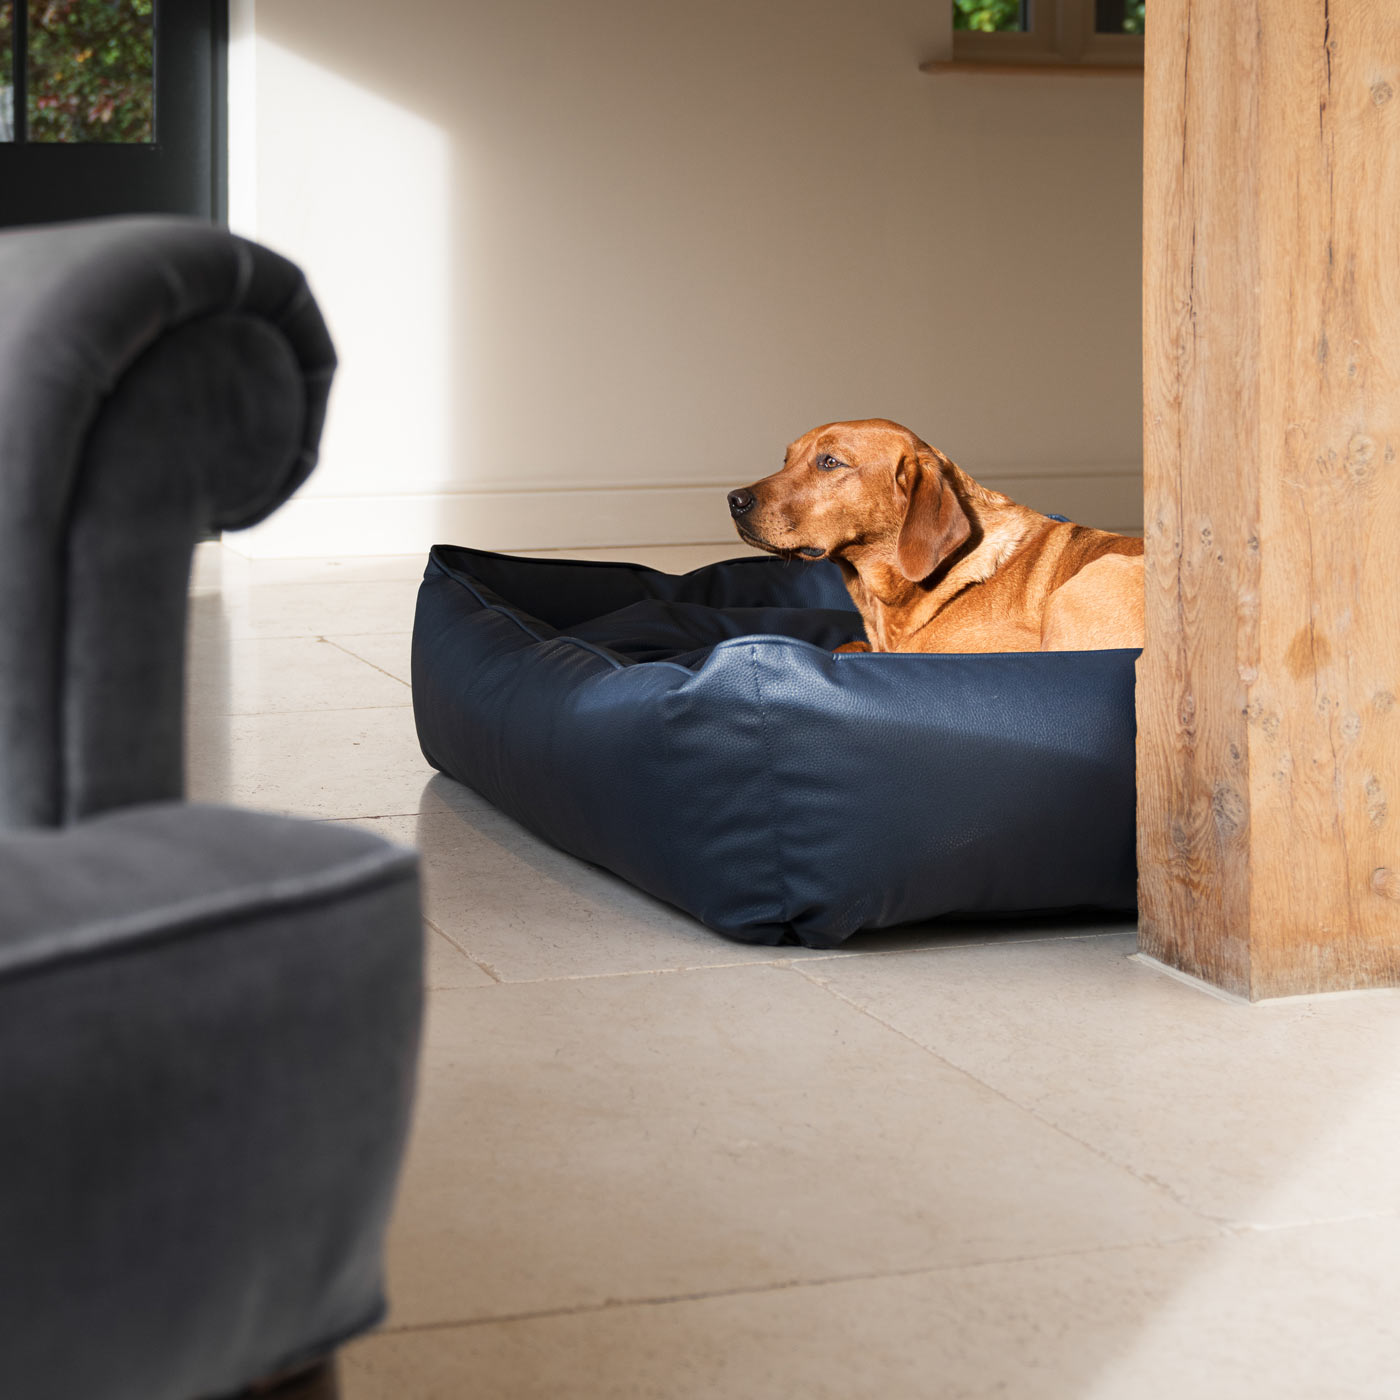 Luxury Handmade Box Bed in Rhino Tough Jungle Faux Leather, in Pacific, Perfect For Your Pets Nap Time! Available To Personalize at Lords & Labradors US